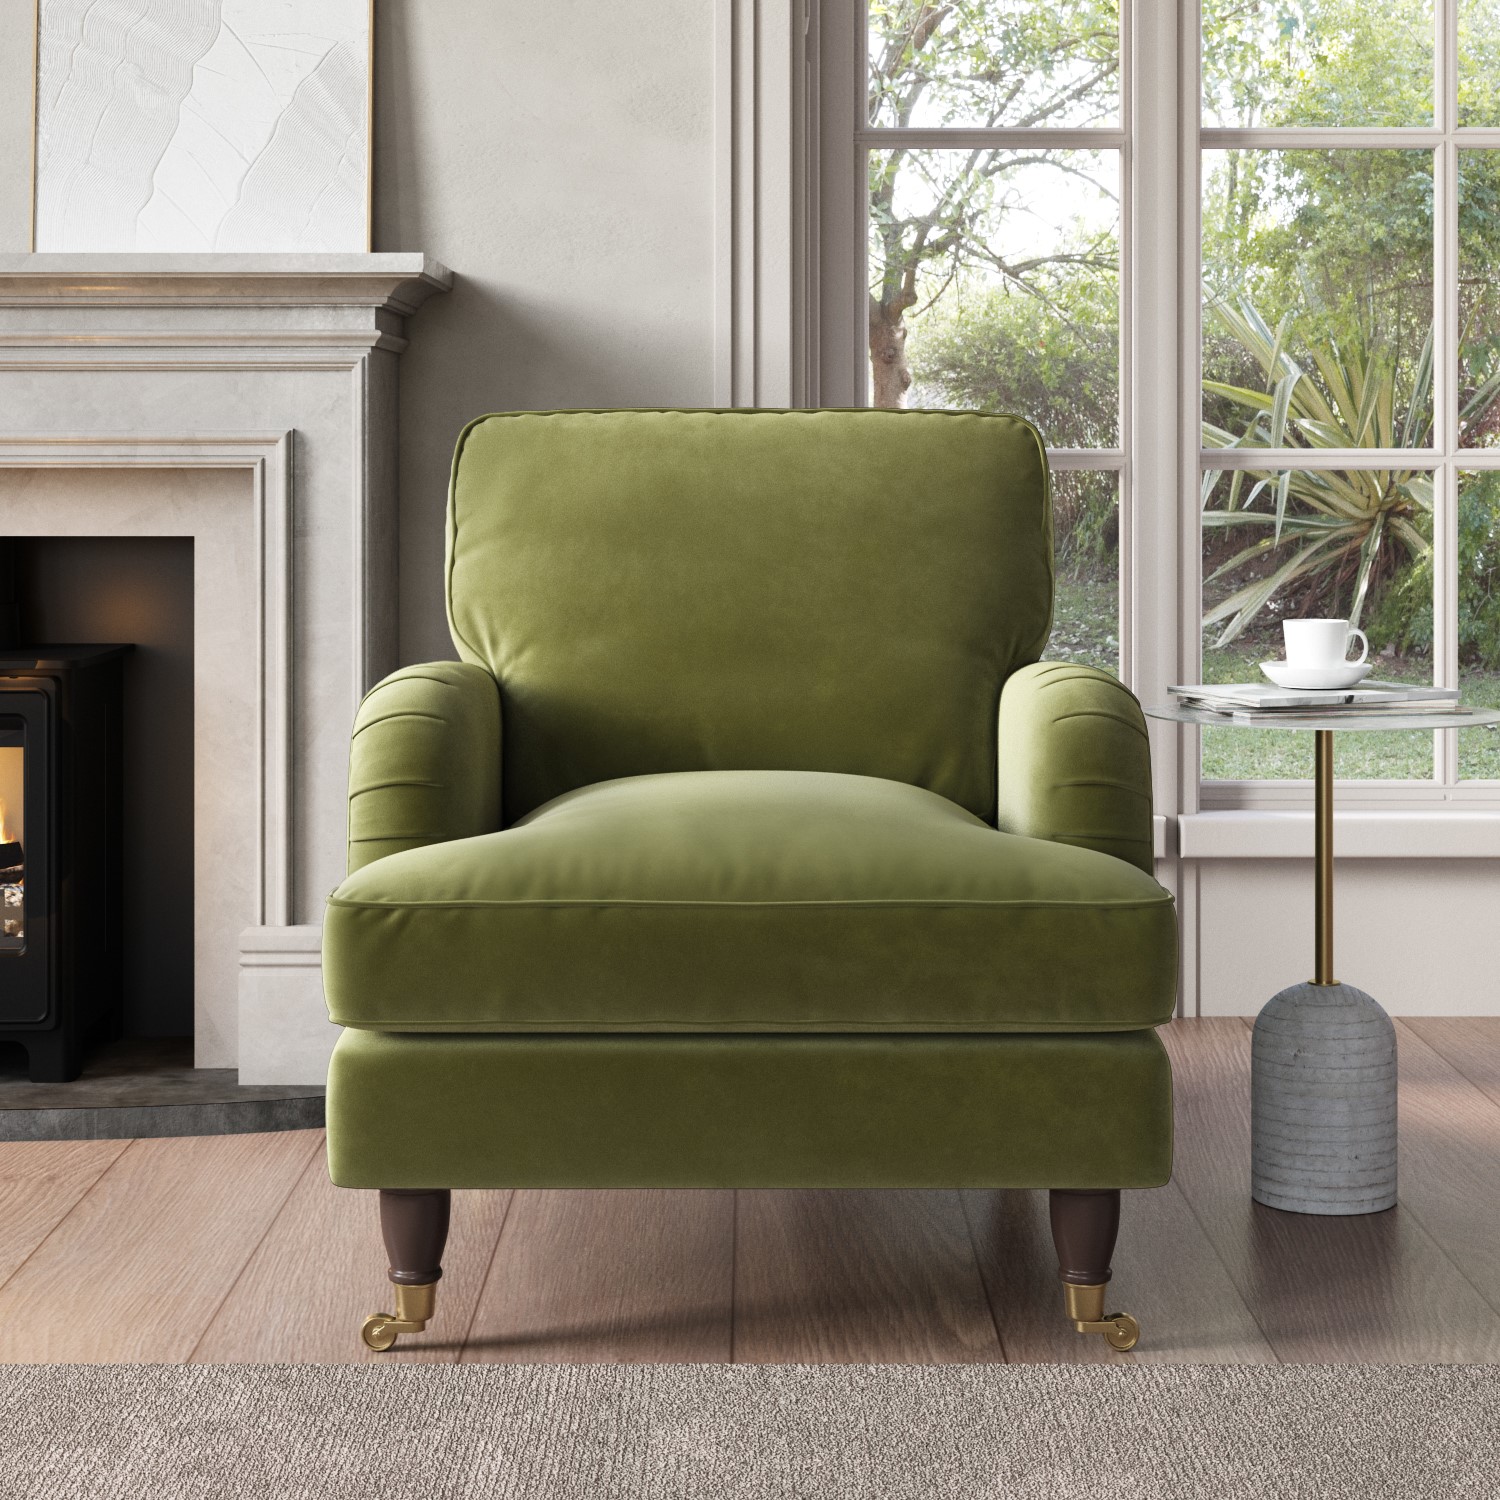 Read more about Olive green velvet armchair payton